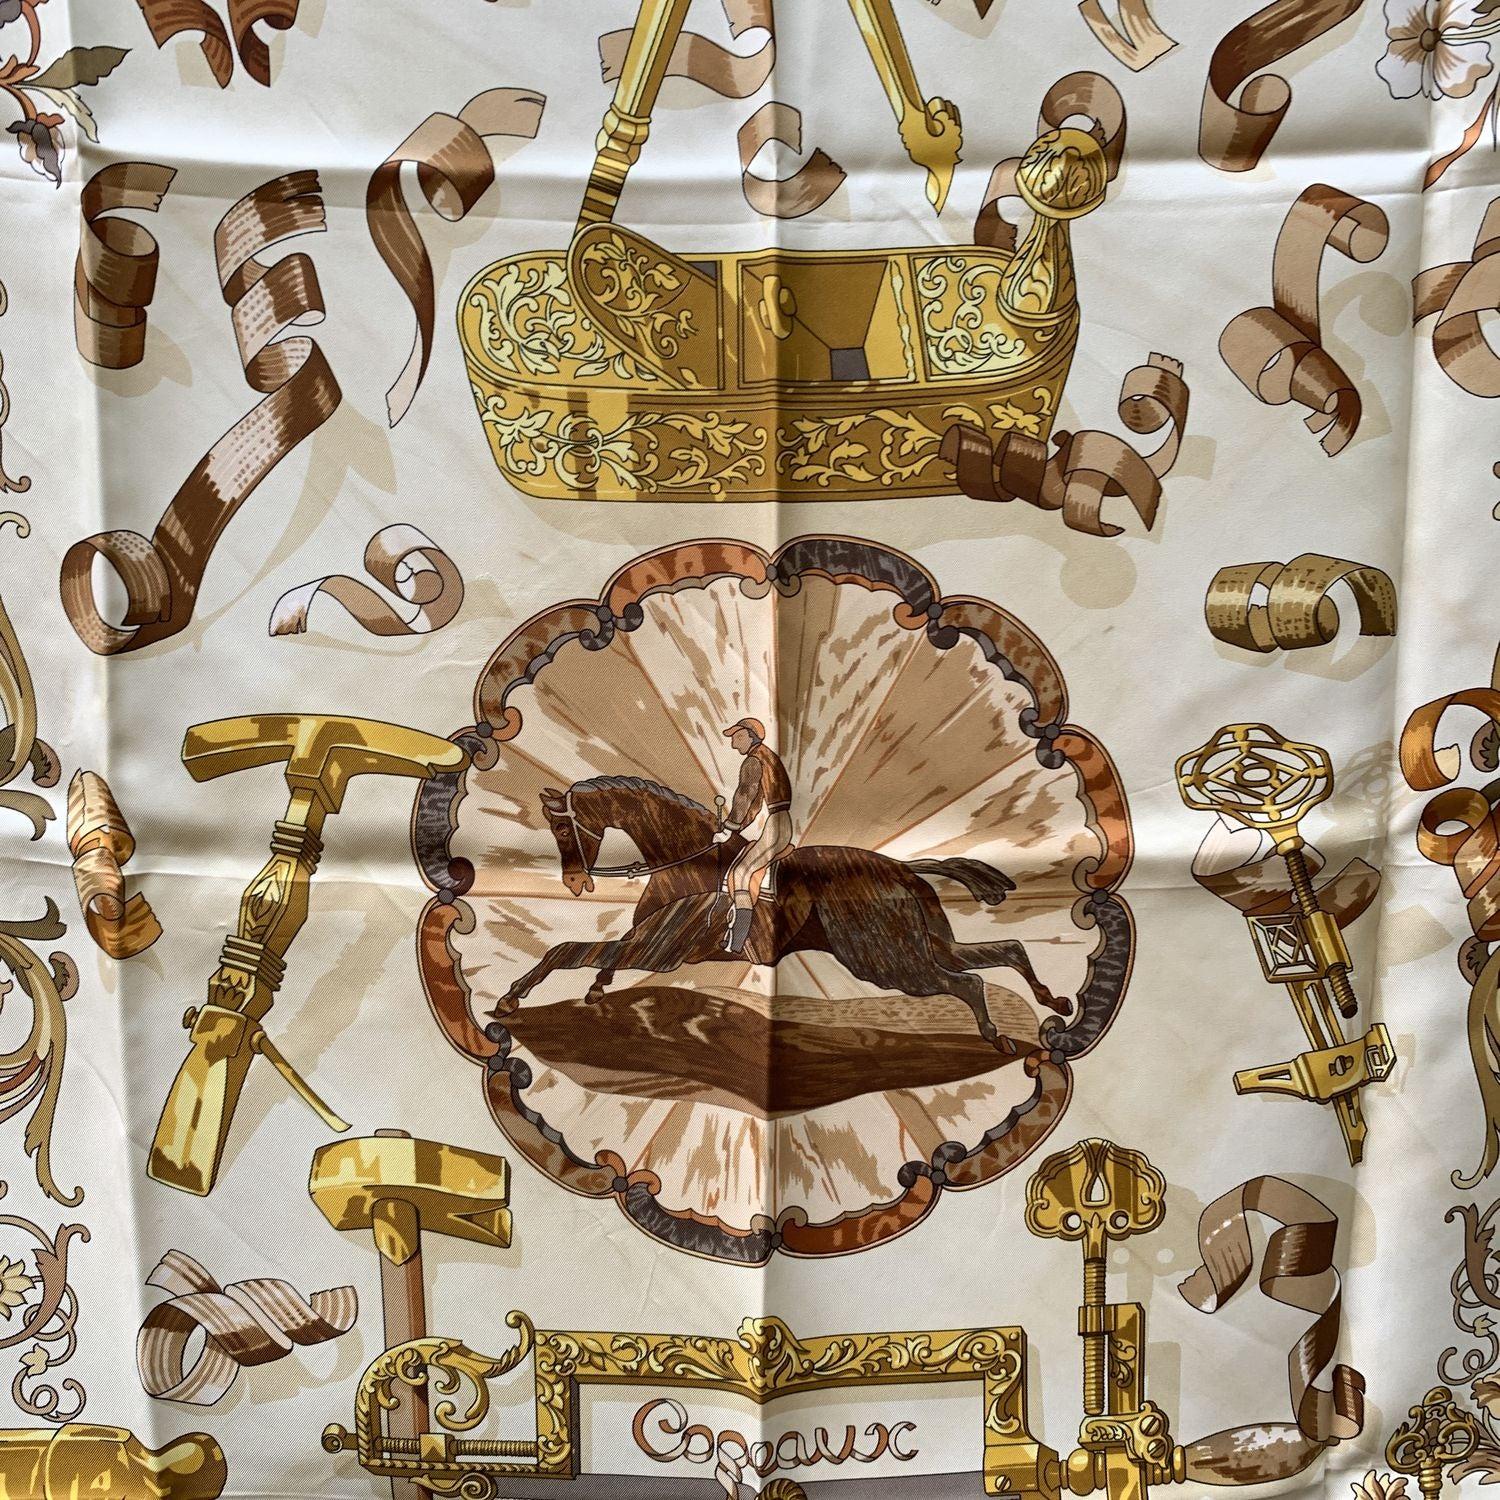 HERMES scarf 'Copeaux' by Caty Latham and originally issued in 1998. Equestrian design. Blue borders. 100% silk, hand rolled hem, made in France. Composition tag still attached. Measurements: 35 x 35 inches - 88,8 x 88, 8 cm. 'HERMES Paris' printed